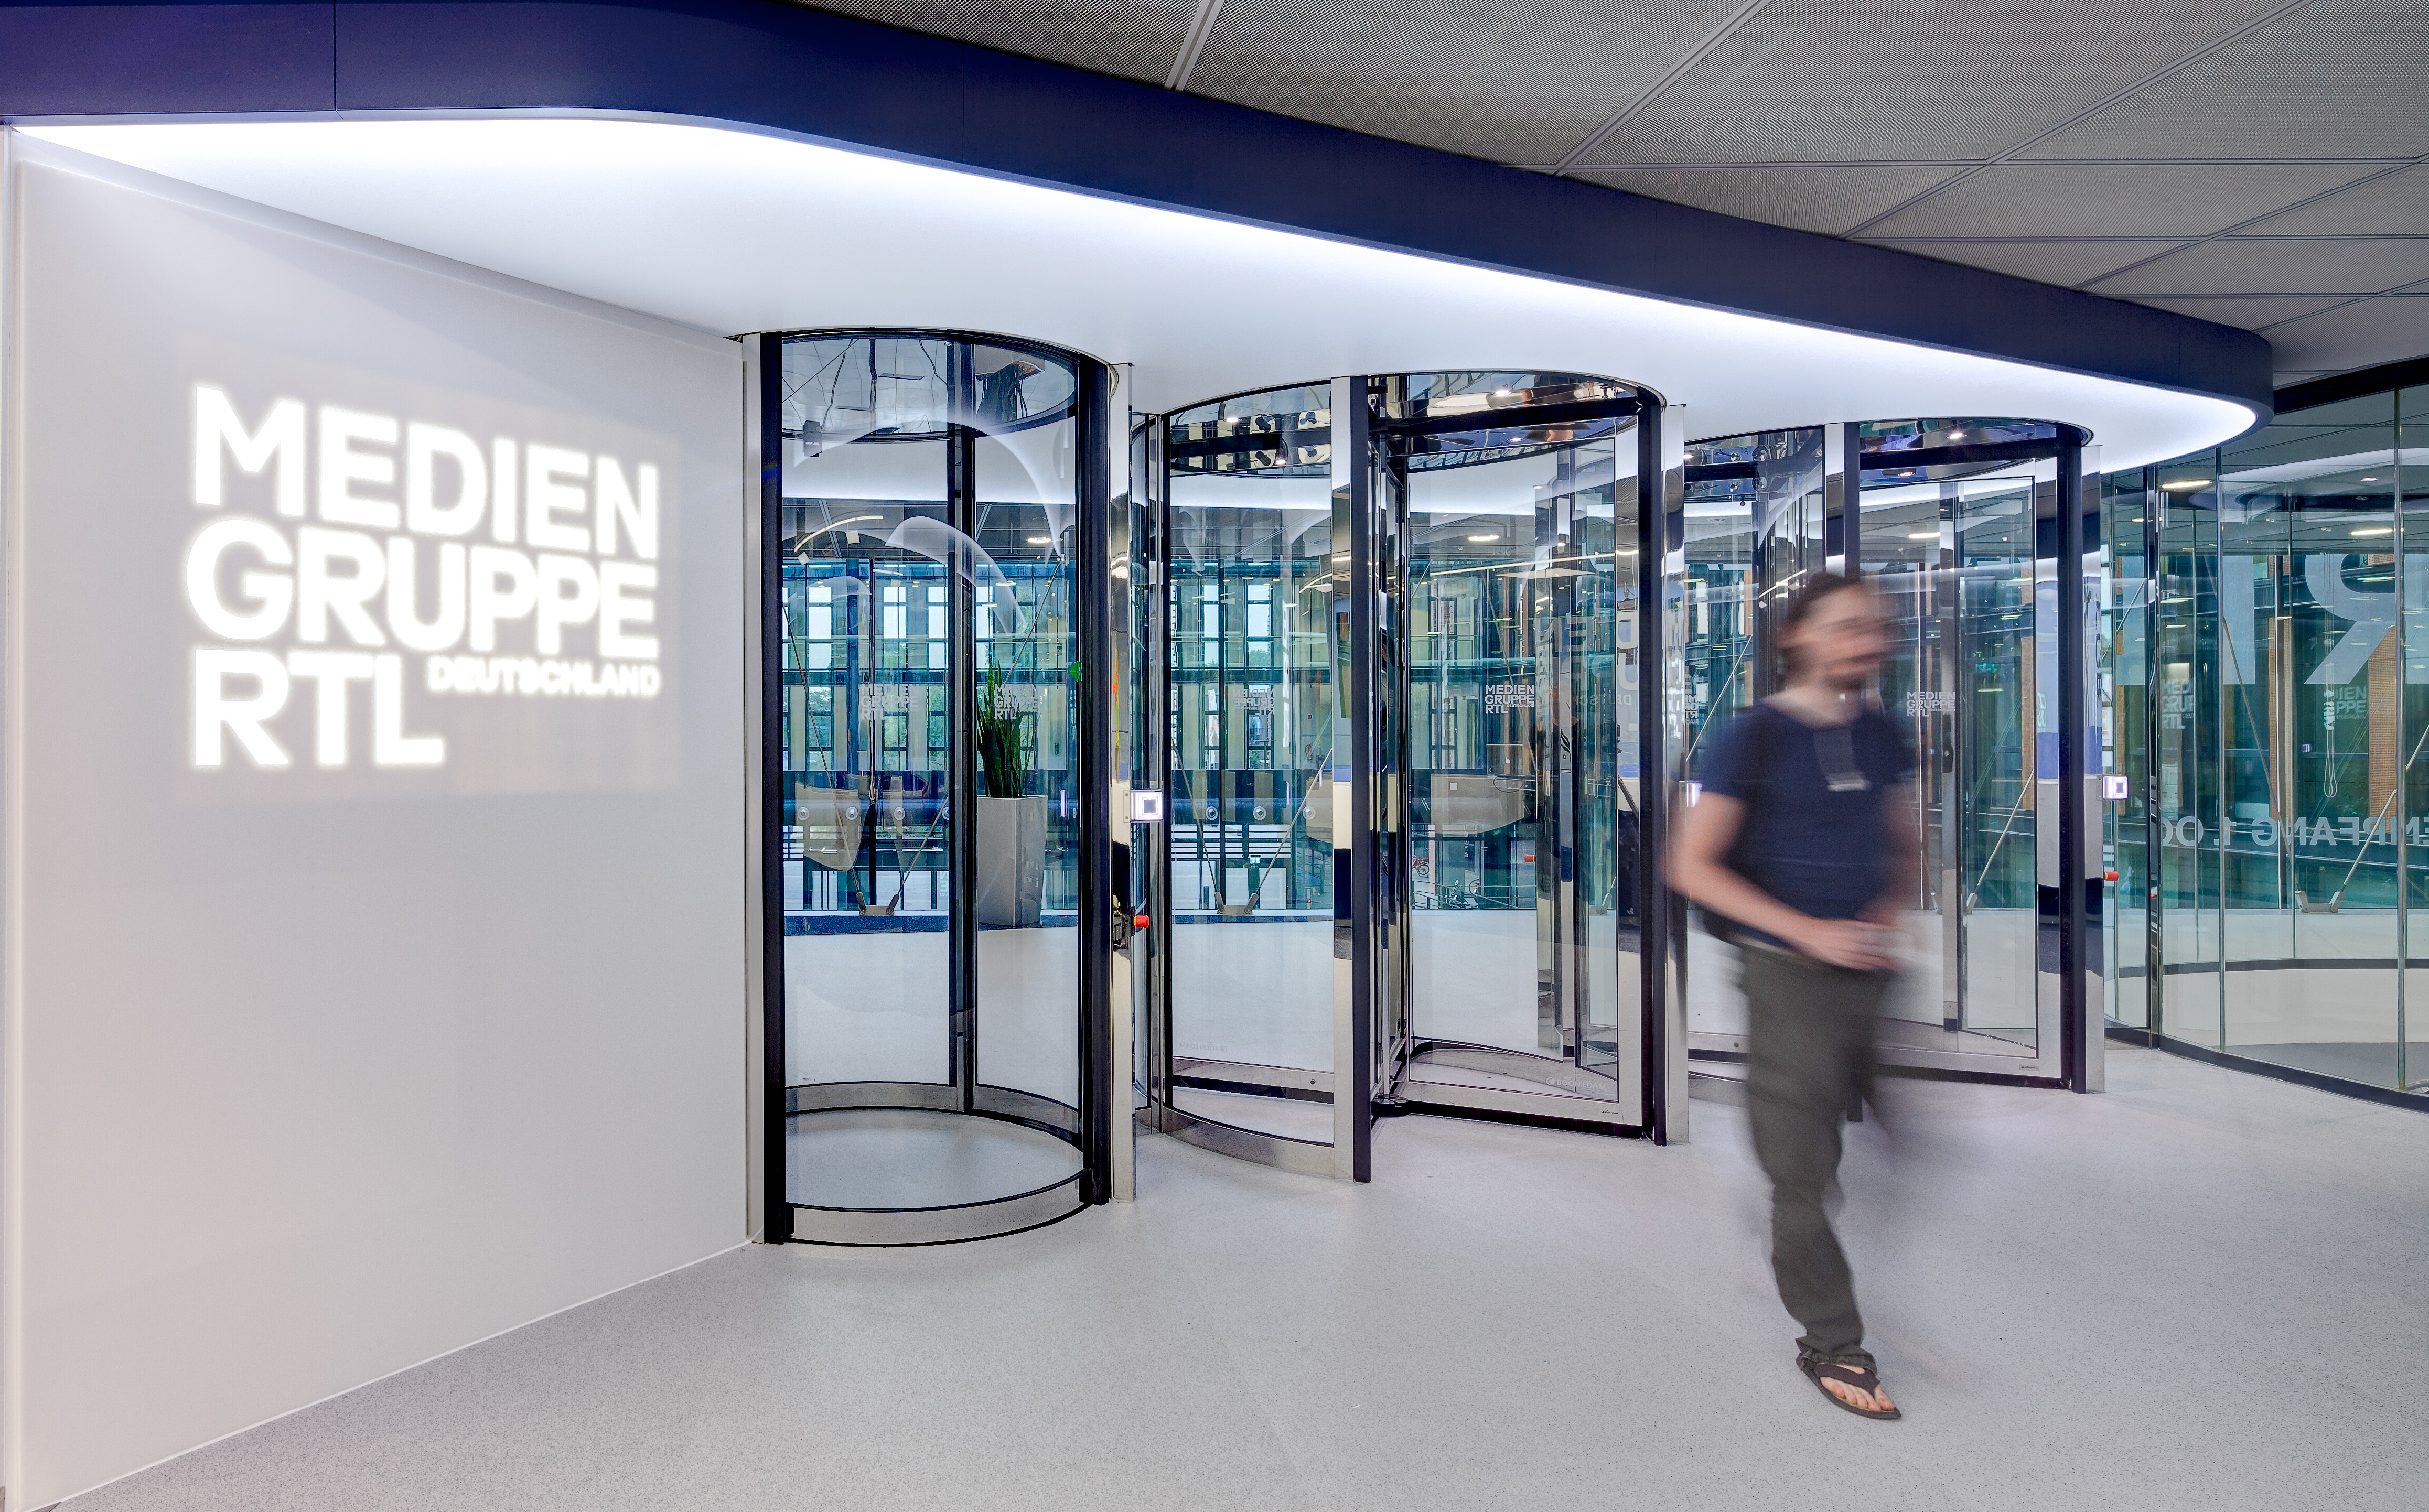 Secure entrance gates and projected company logo on the wall